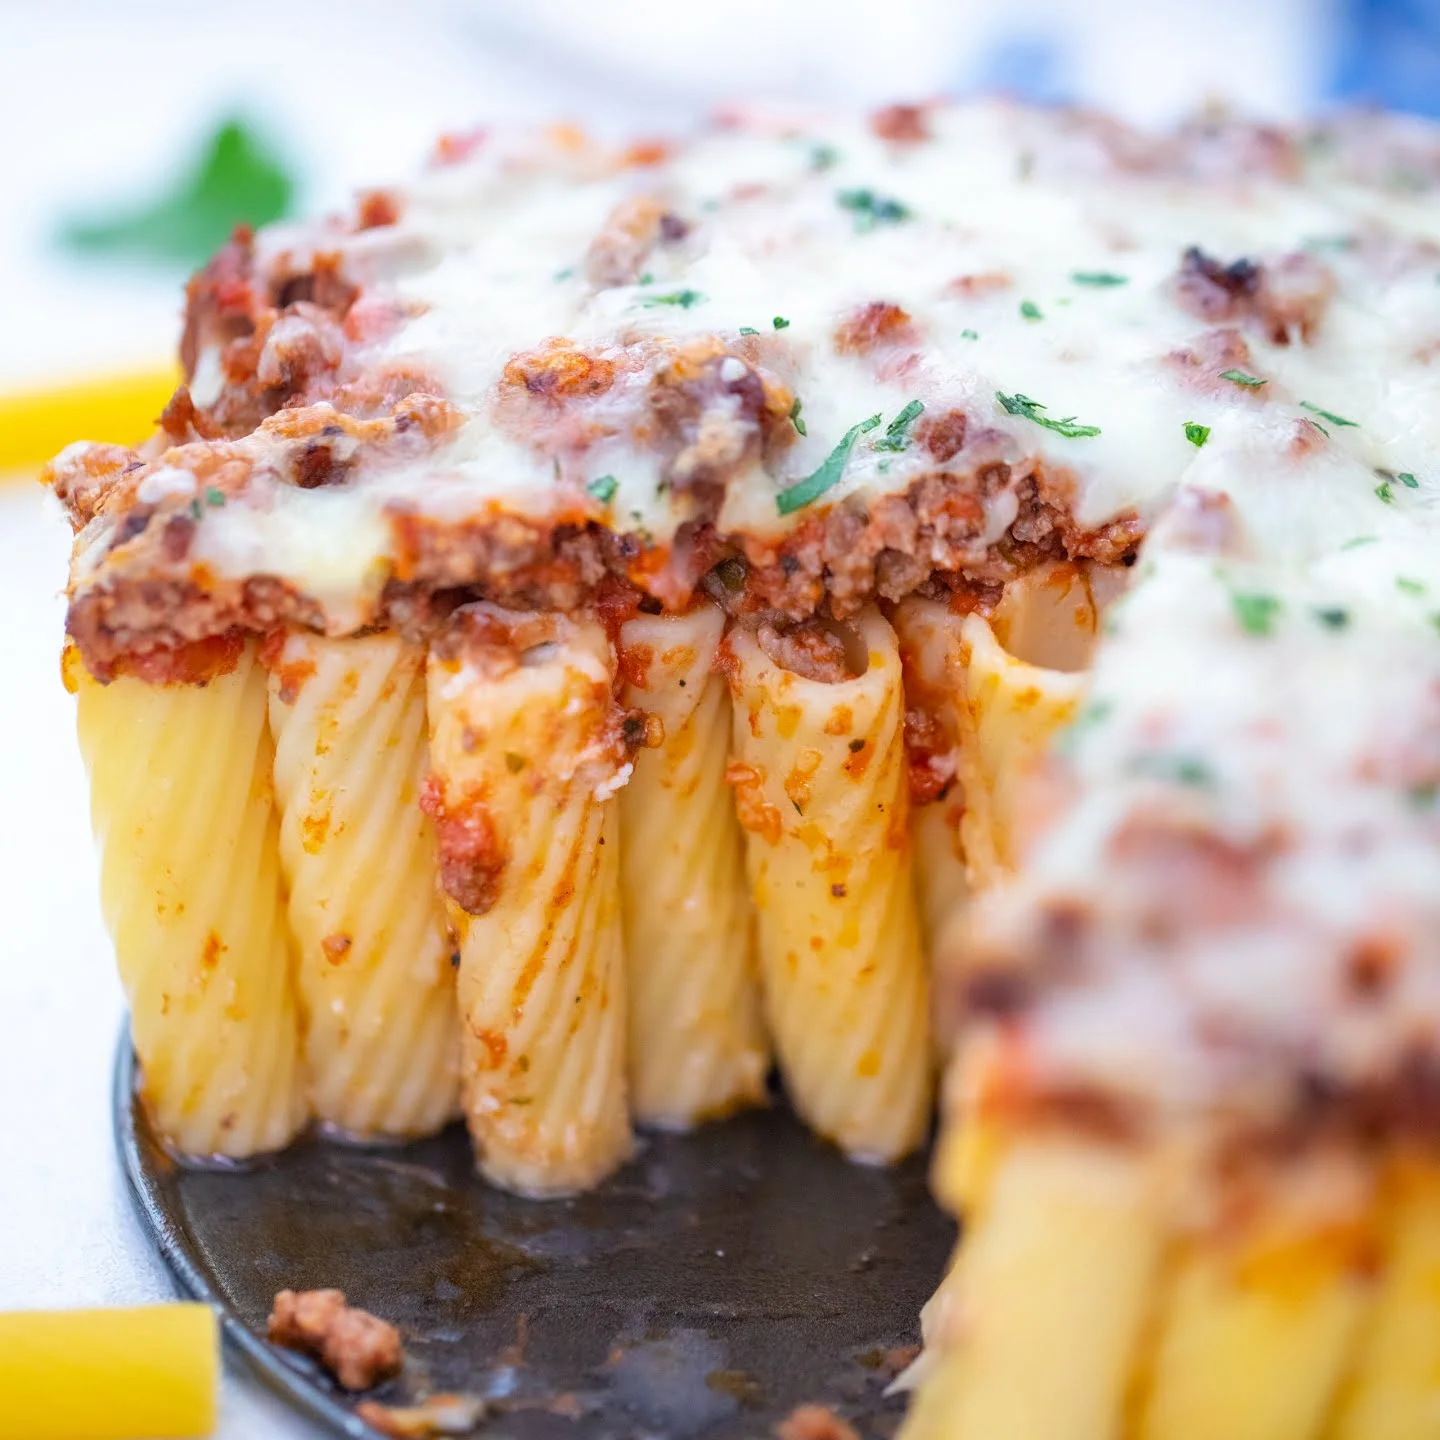 stuffed rigatoni with ground turkey and cheese on top